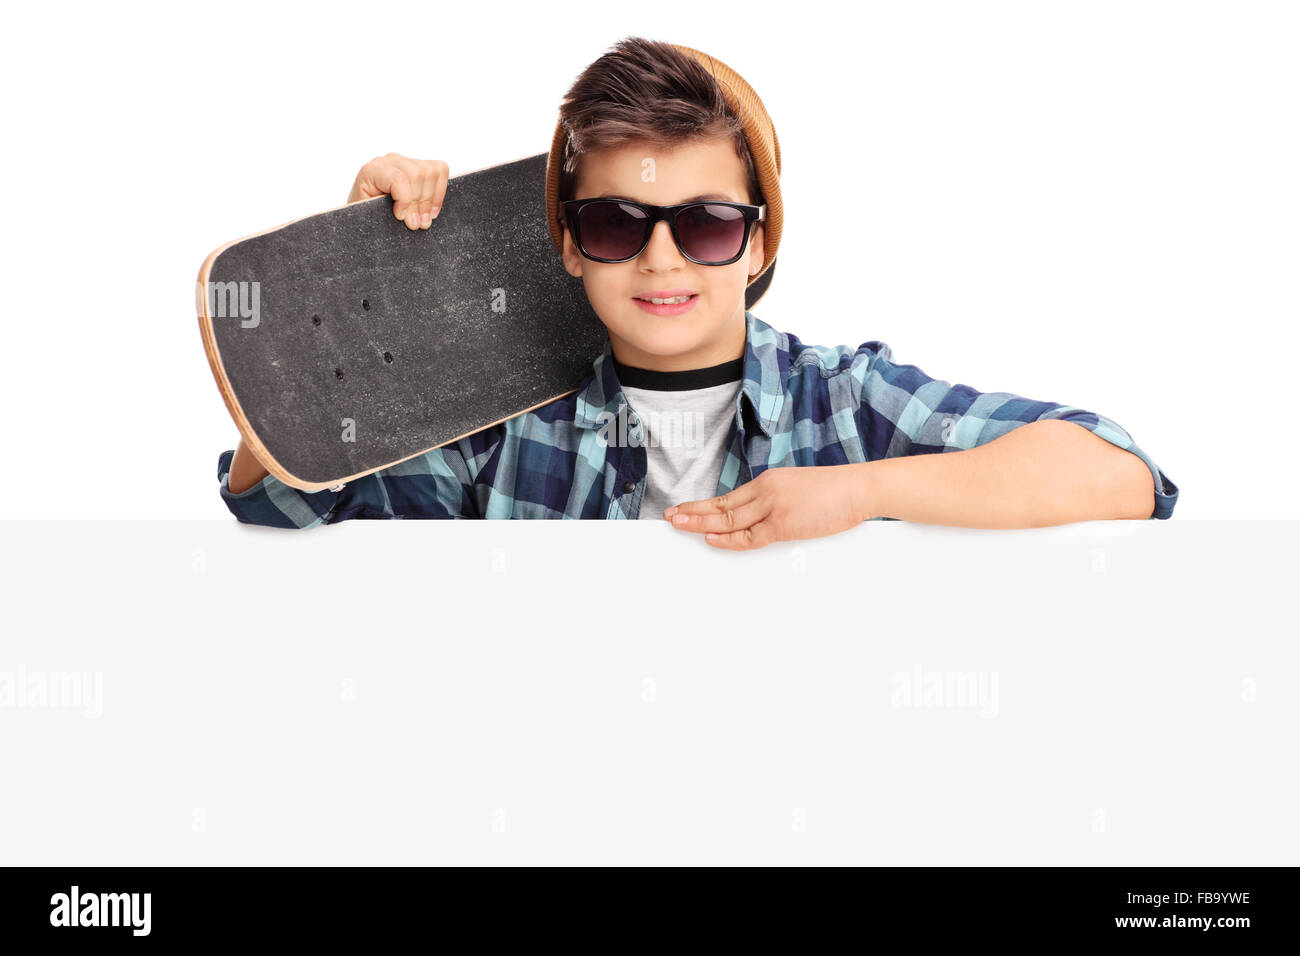 Cool little boy with sunglasses holding a skateboard and posing behind a signboard isolated on white background Stock Photo